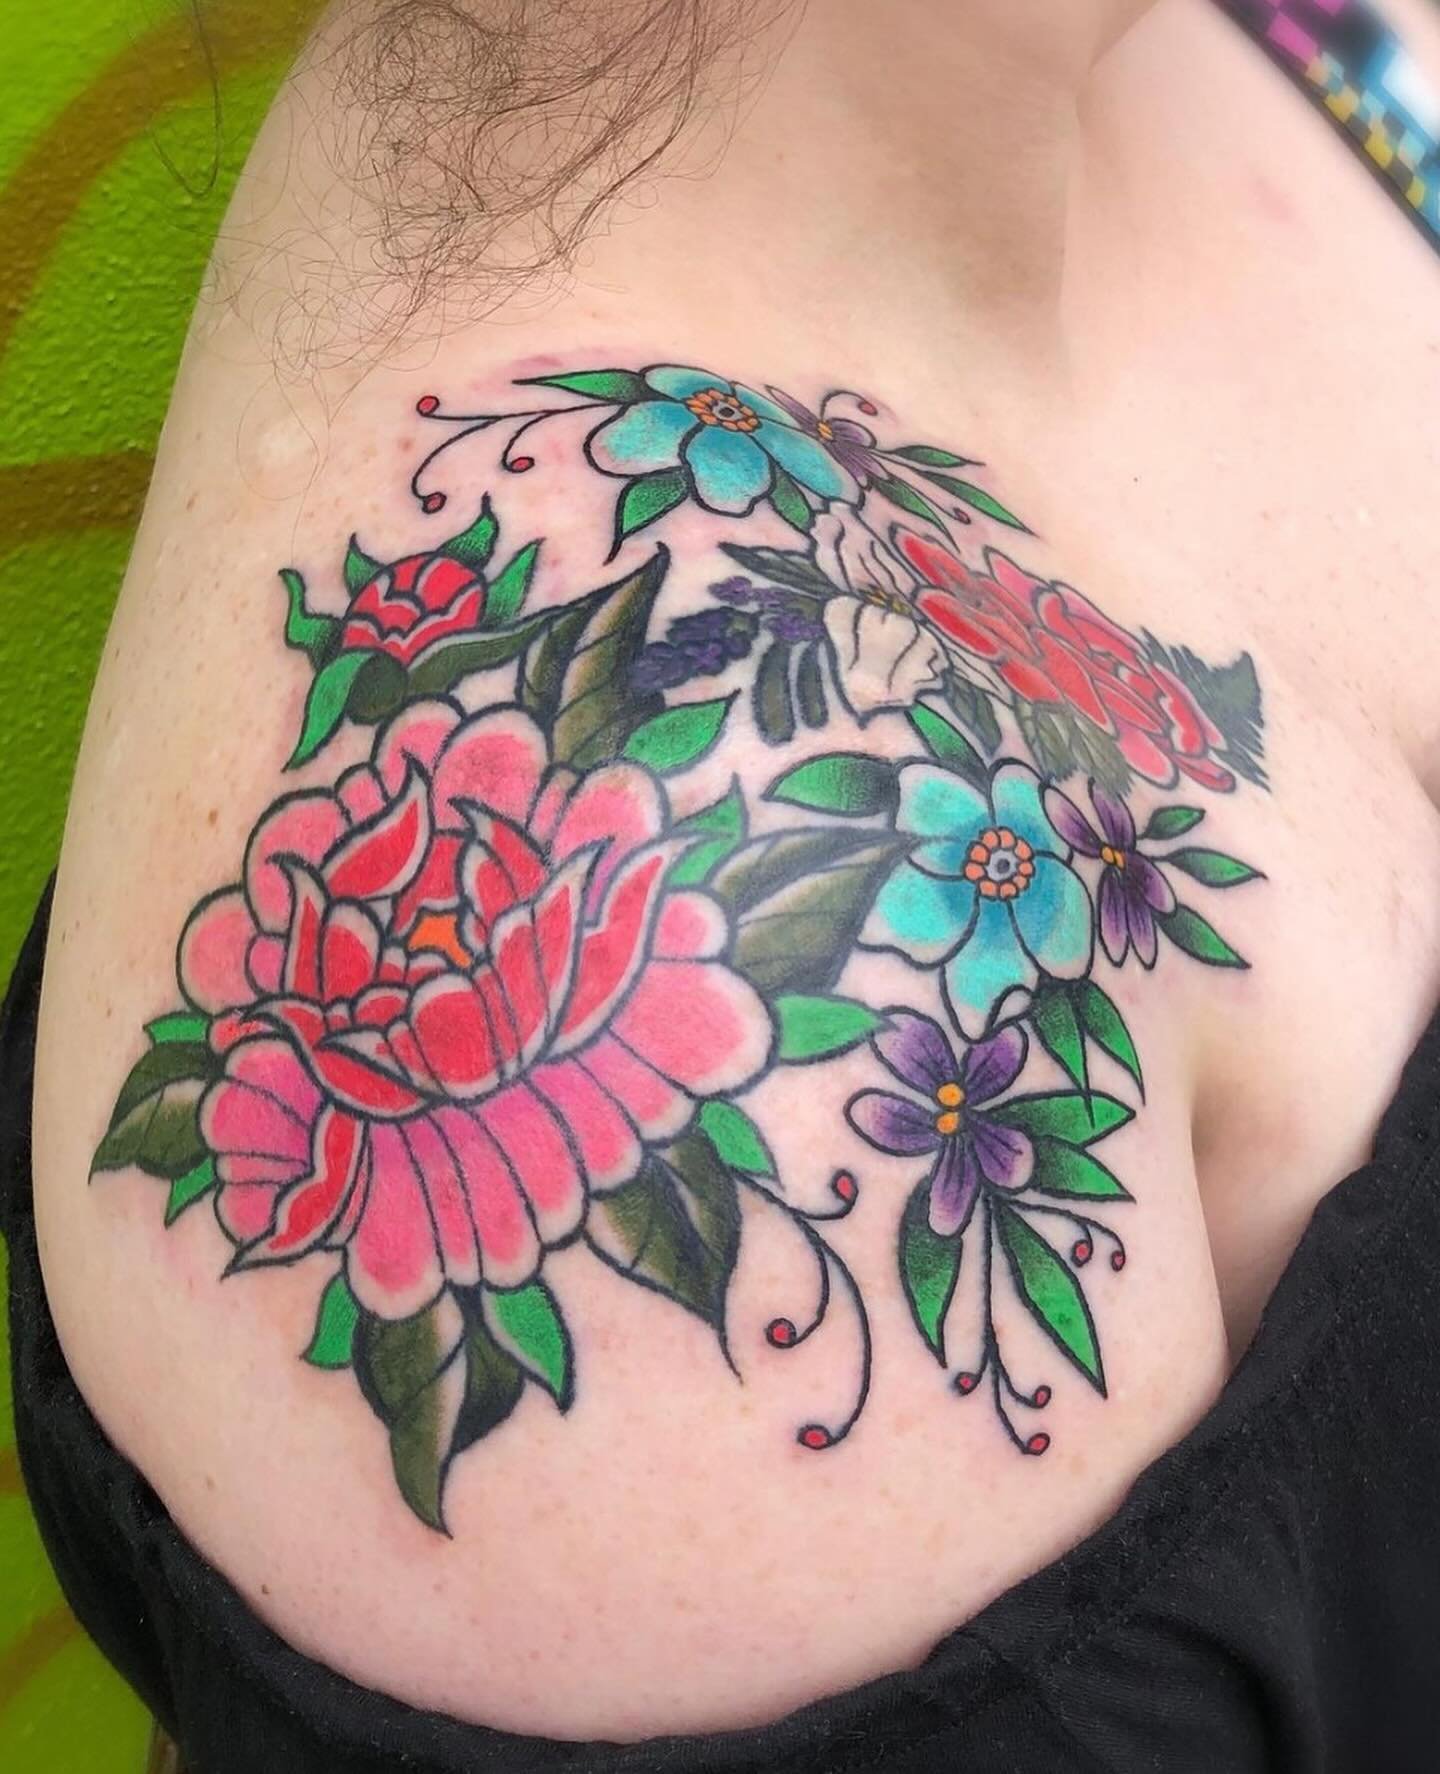 Tattooing by @amelia.ann.artistry 💐✨✨ now taking appointments through the super convenient book form on her page!
.
.
.
.
.
.
.
#floraltattoo #floraltattoodesign #kentonpdx #portlandoregon #pnwtattoo #seattletattoo #pdxtattoo